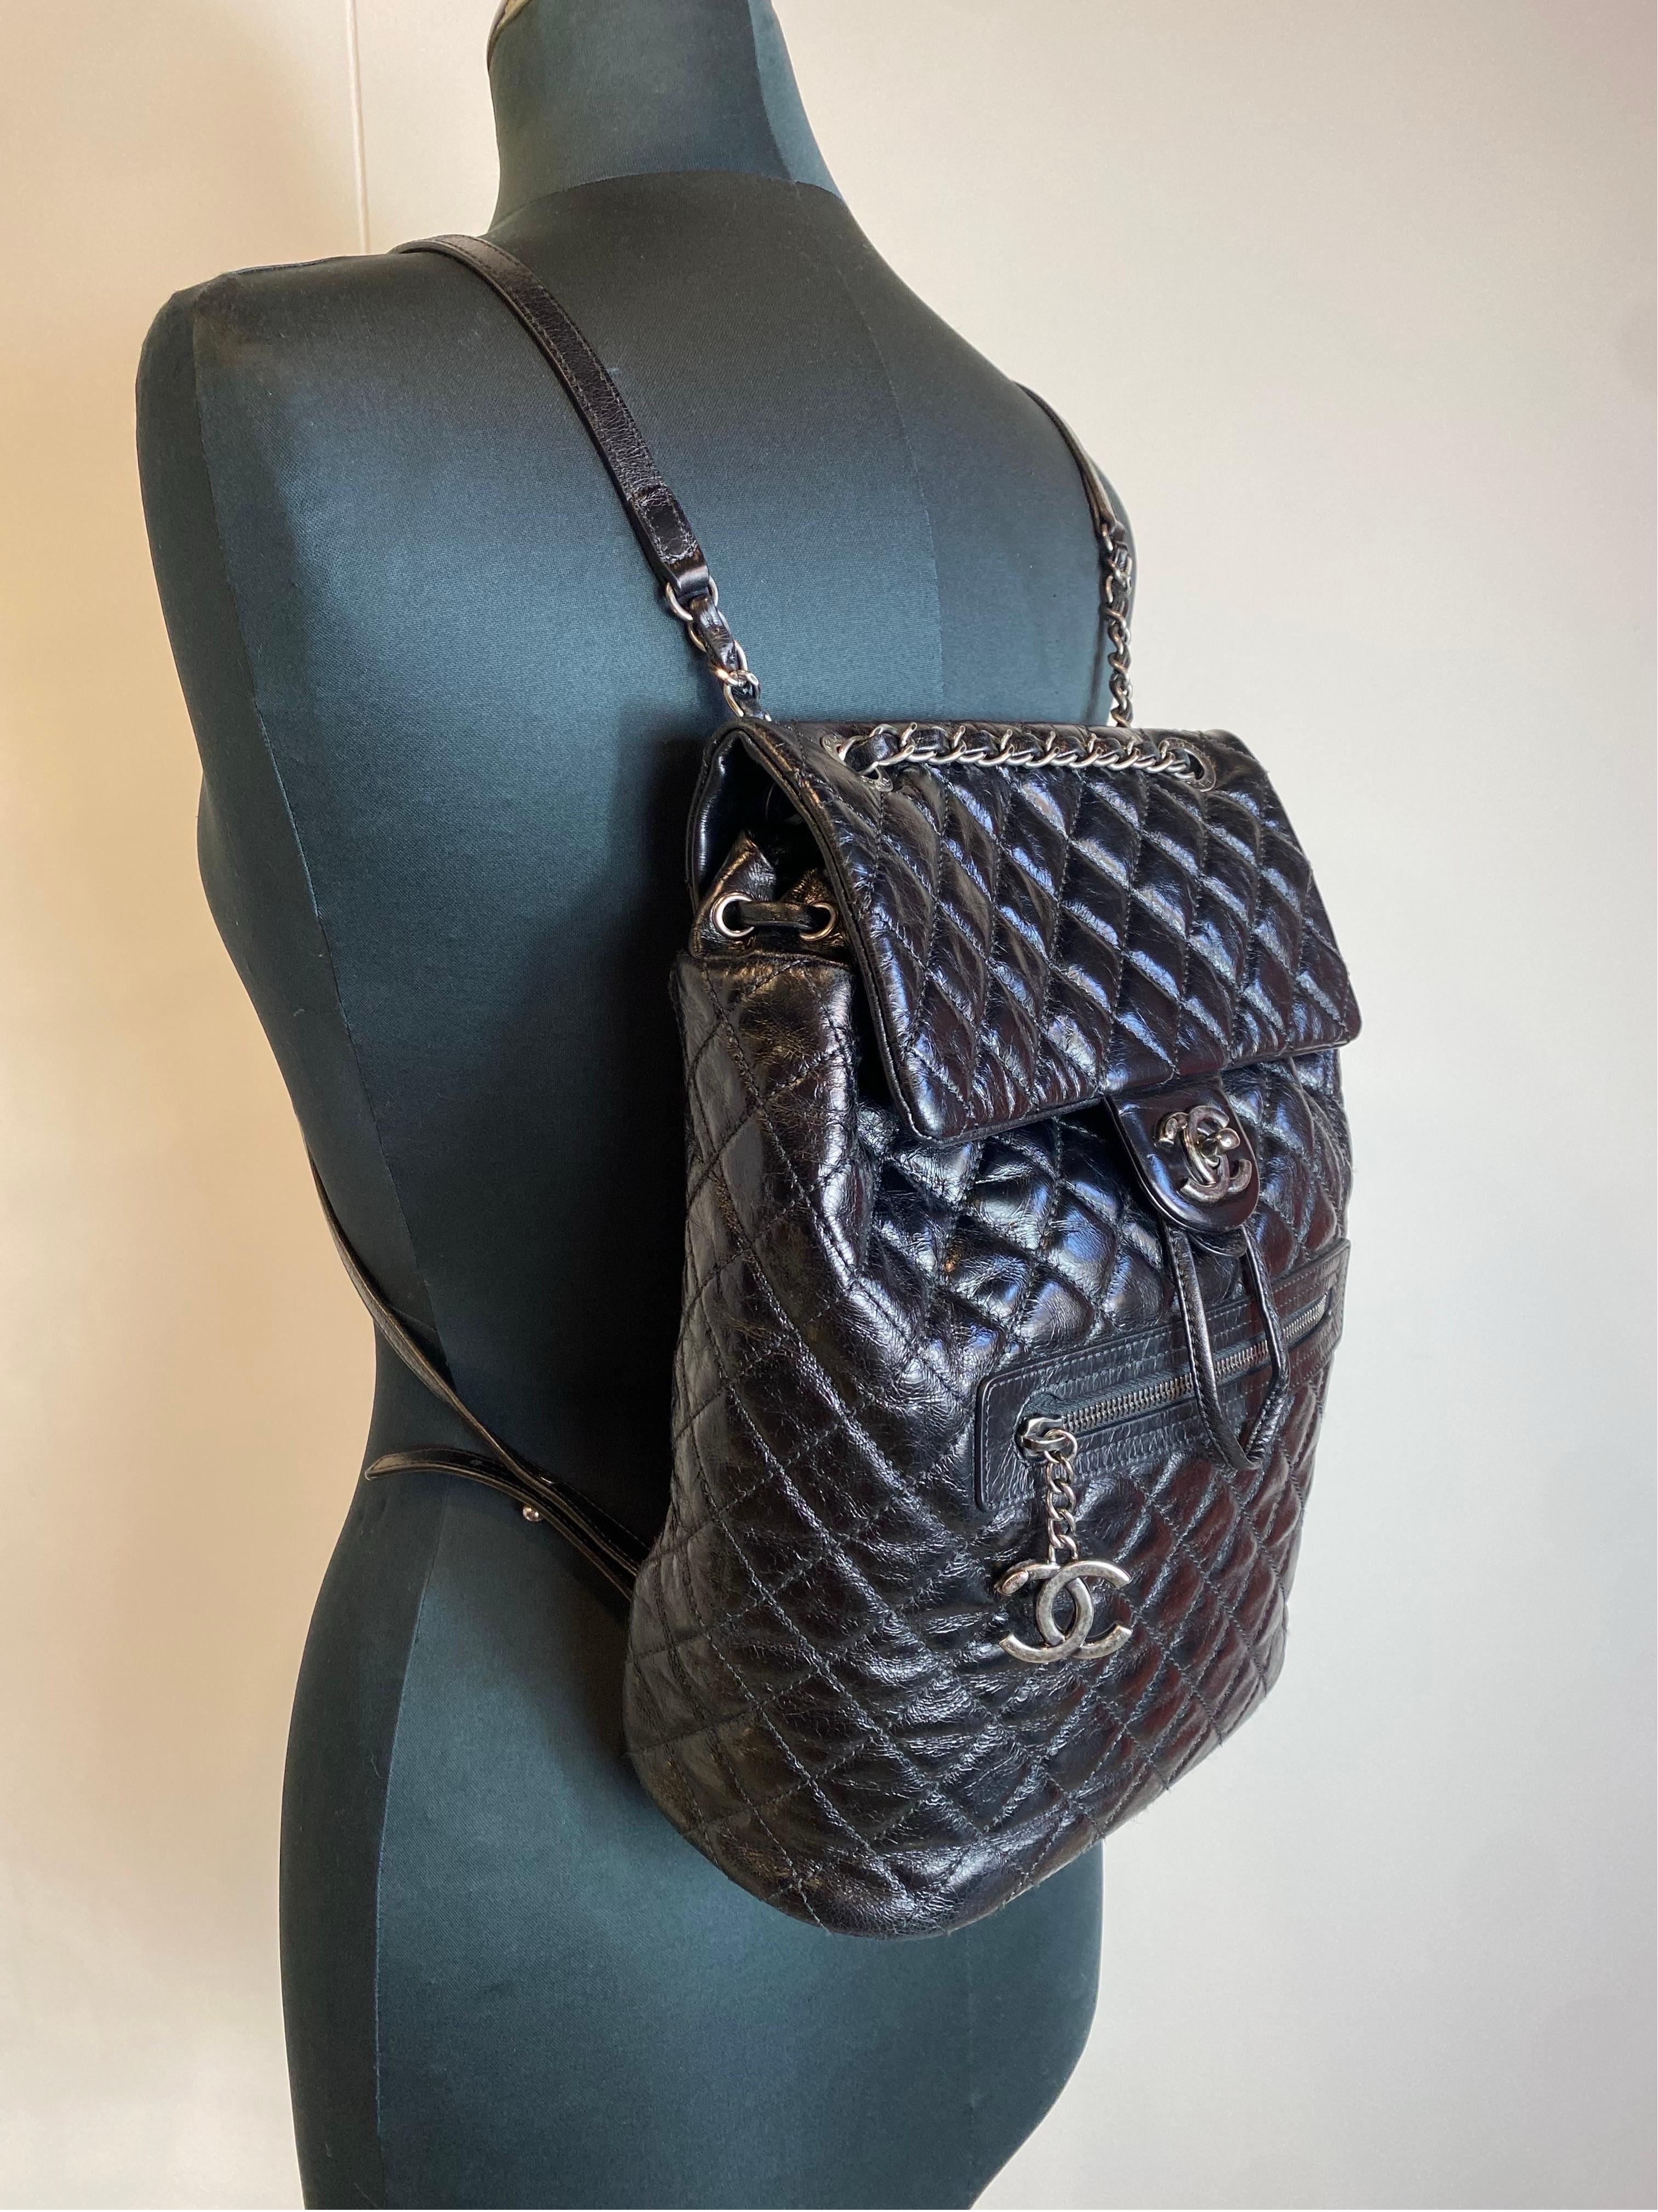 Chanel Mountain backpack.
In black leather and silver hardware (blackened as per photo).
It has two external pockets and one internal one.
Drawstring and clip closure.
The straps are adjustable.
33cm tall
30cm wide
10cm deep
Excellent general